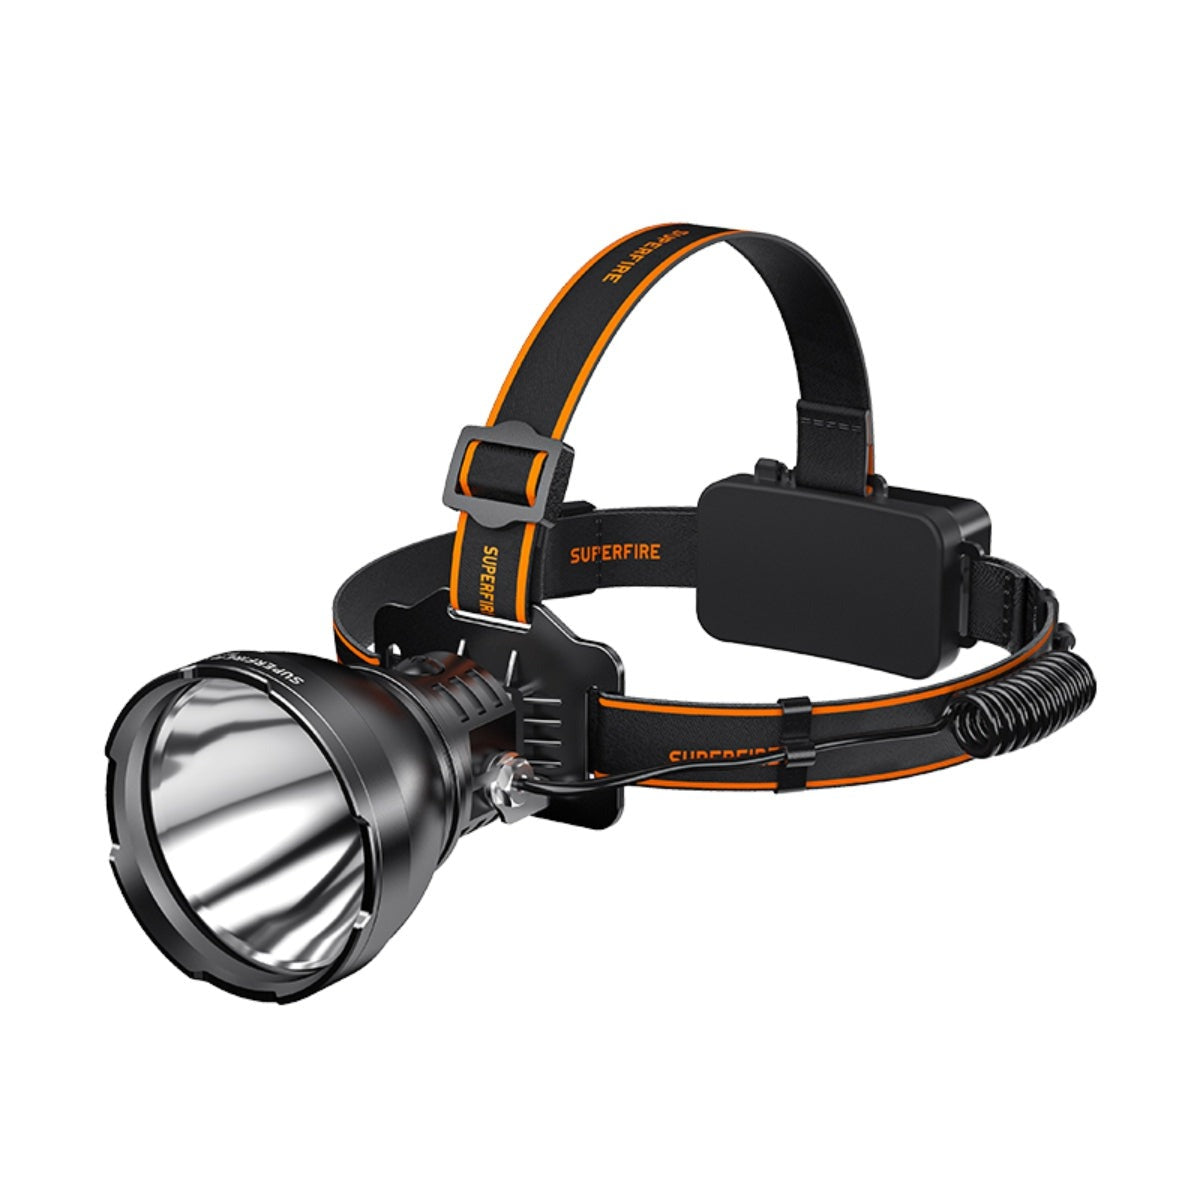 Super Bright Rechargeable Headlamp Portable LED Headlight Built in Battery Working Light Fishing Camping Torch | SUPERFIRE HL60